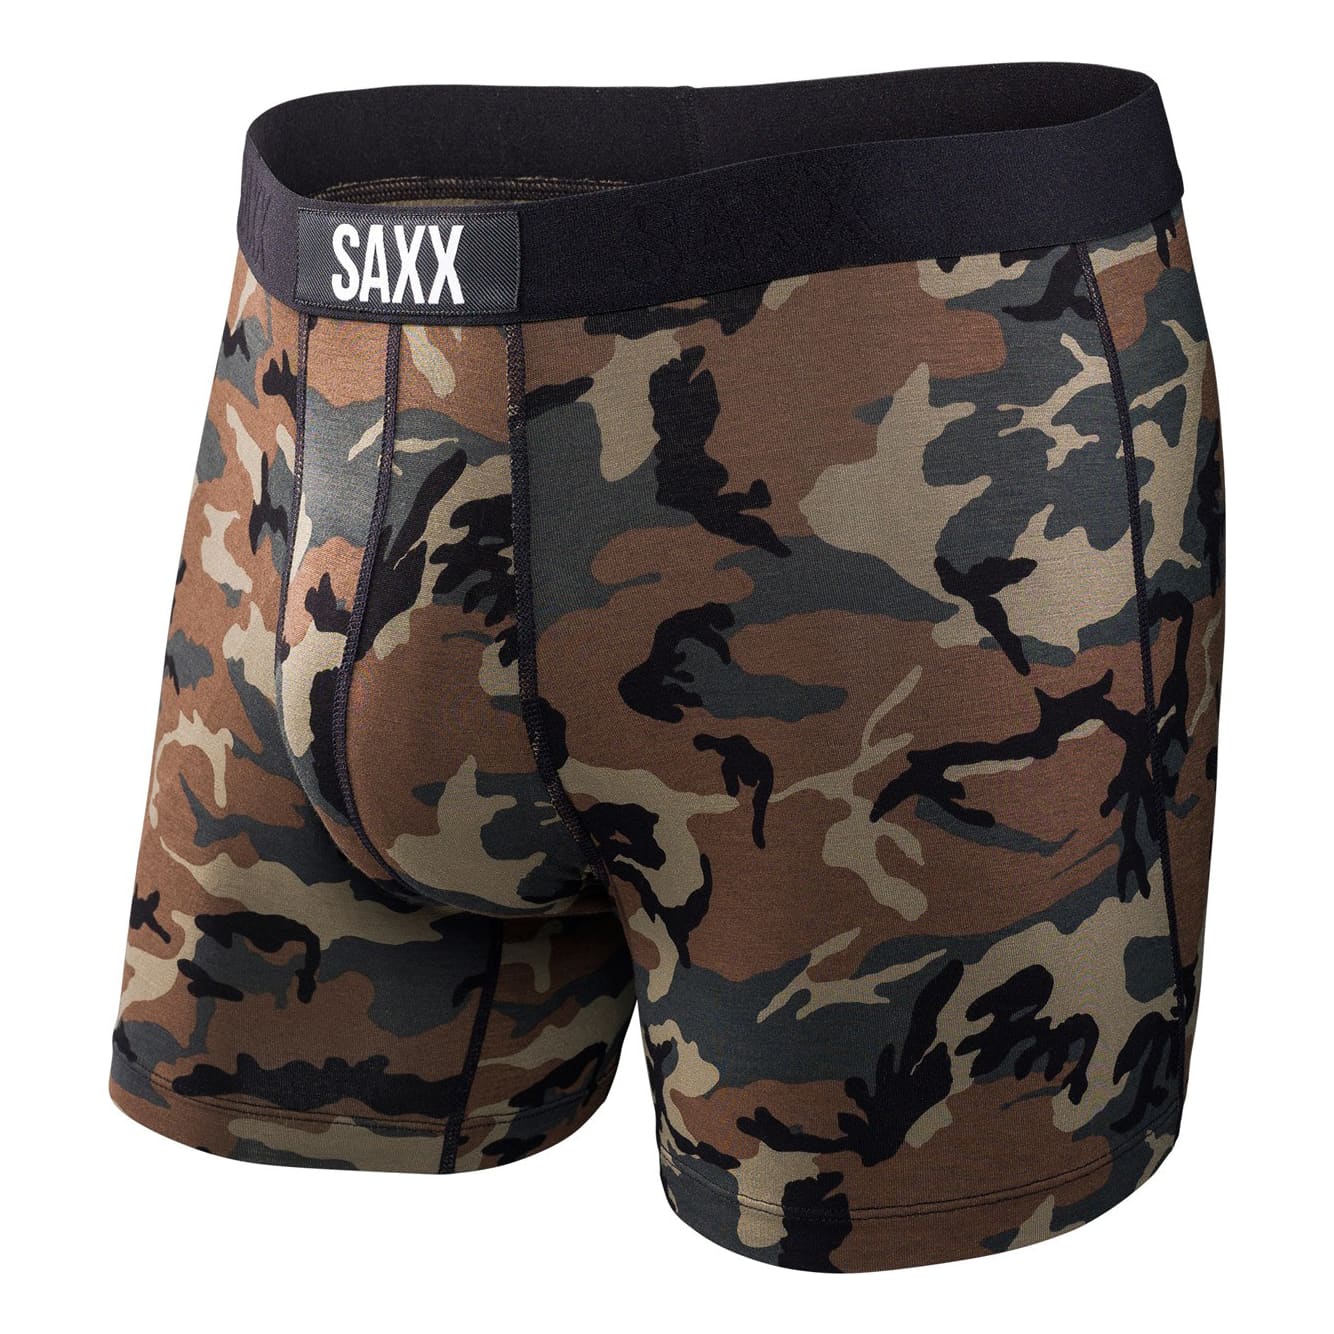 Guys Want SAXX for the Holidays—SAXX Underwear Gifts - Men's Journal